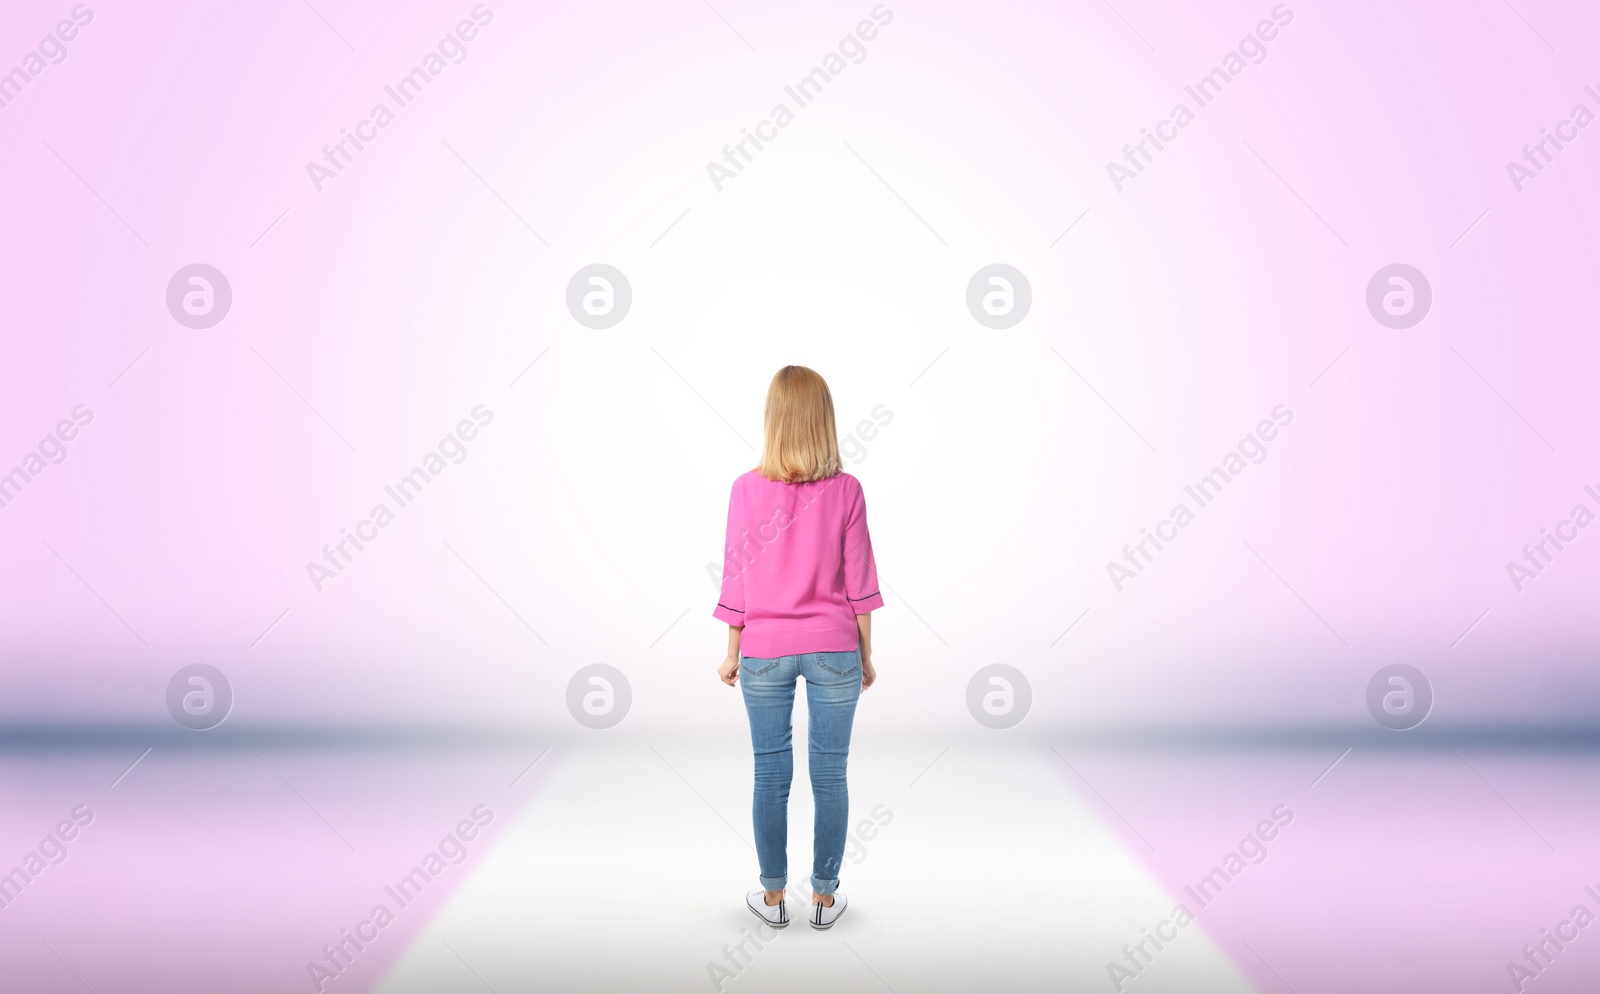 Image of Woman standing in front of pink wall, back view